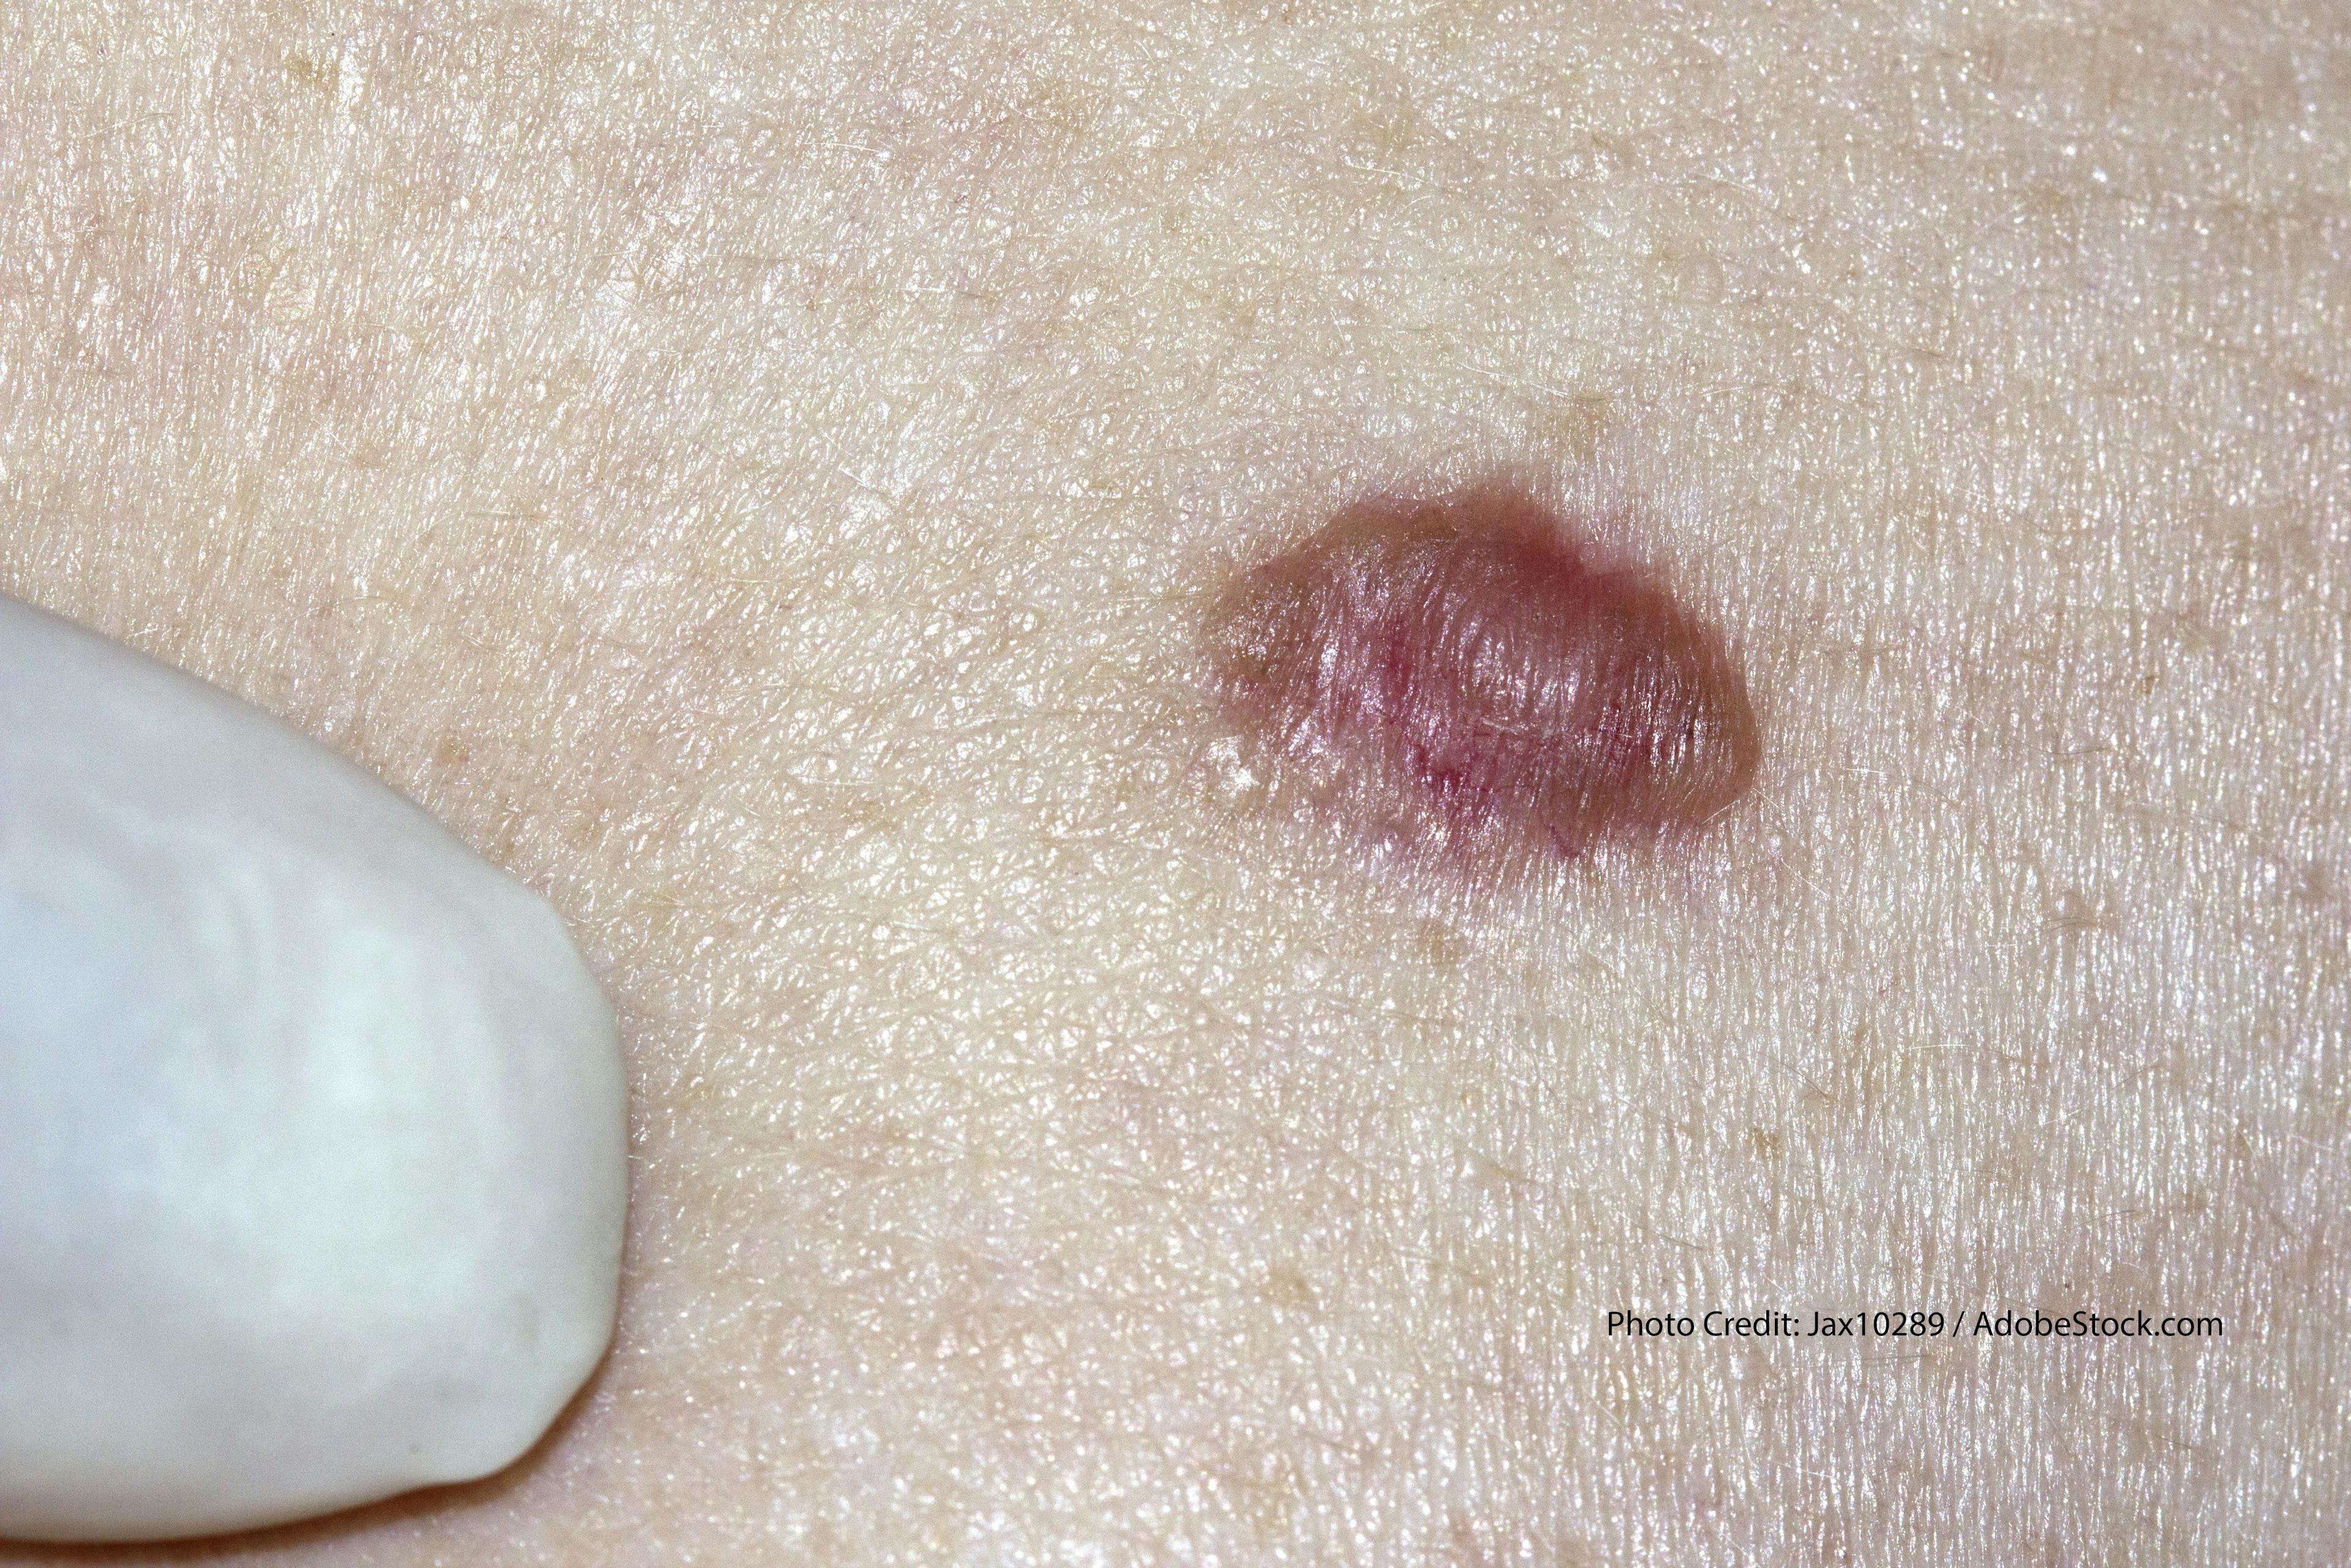 Study: Best Treatments for Basal Cell Carcinoma